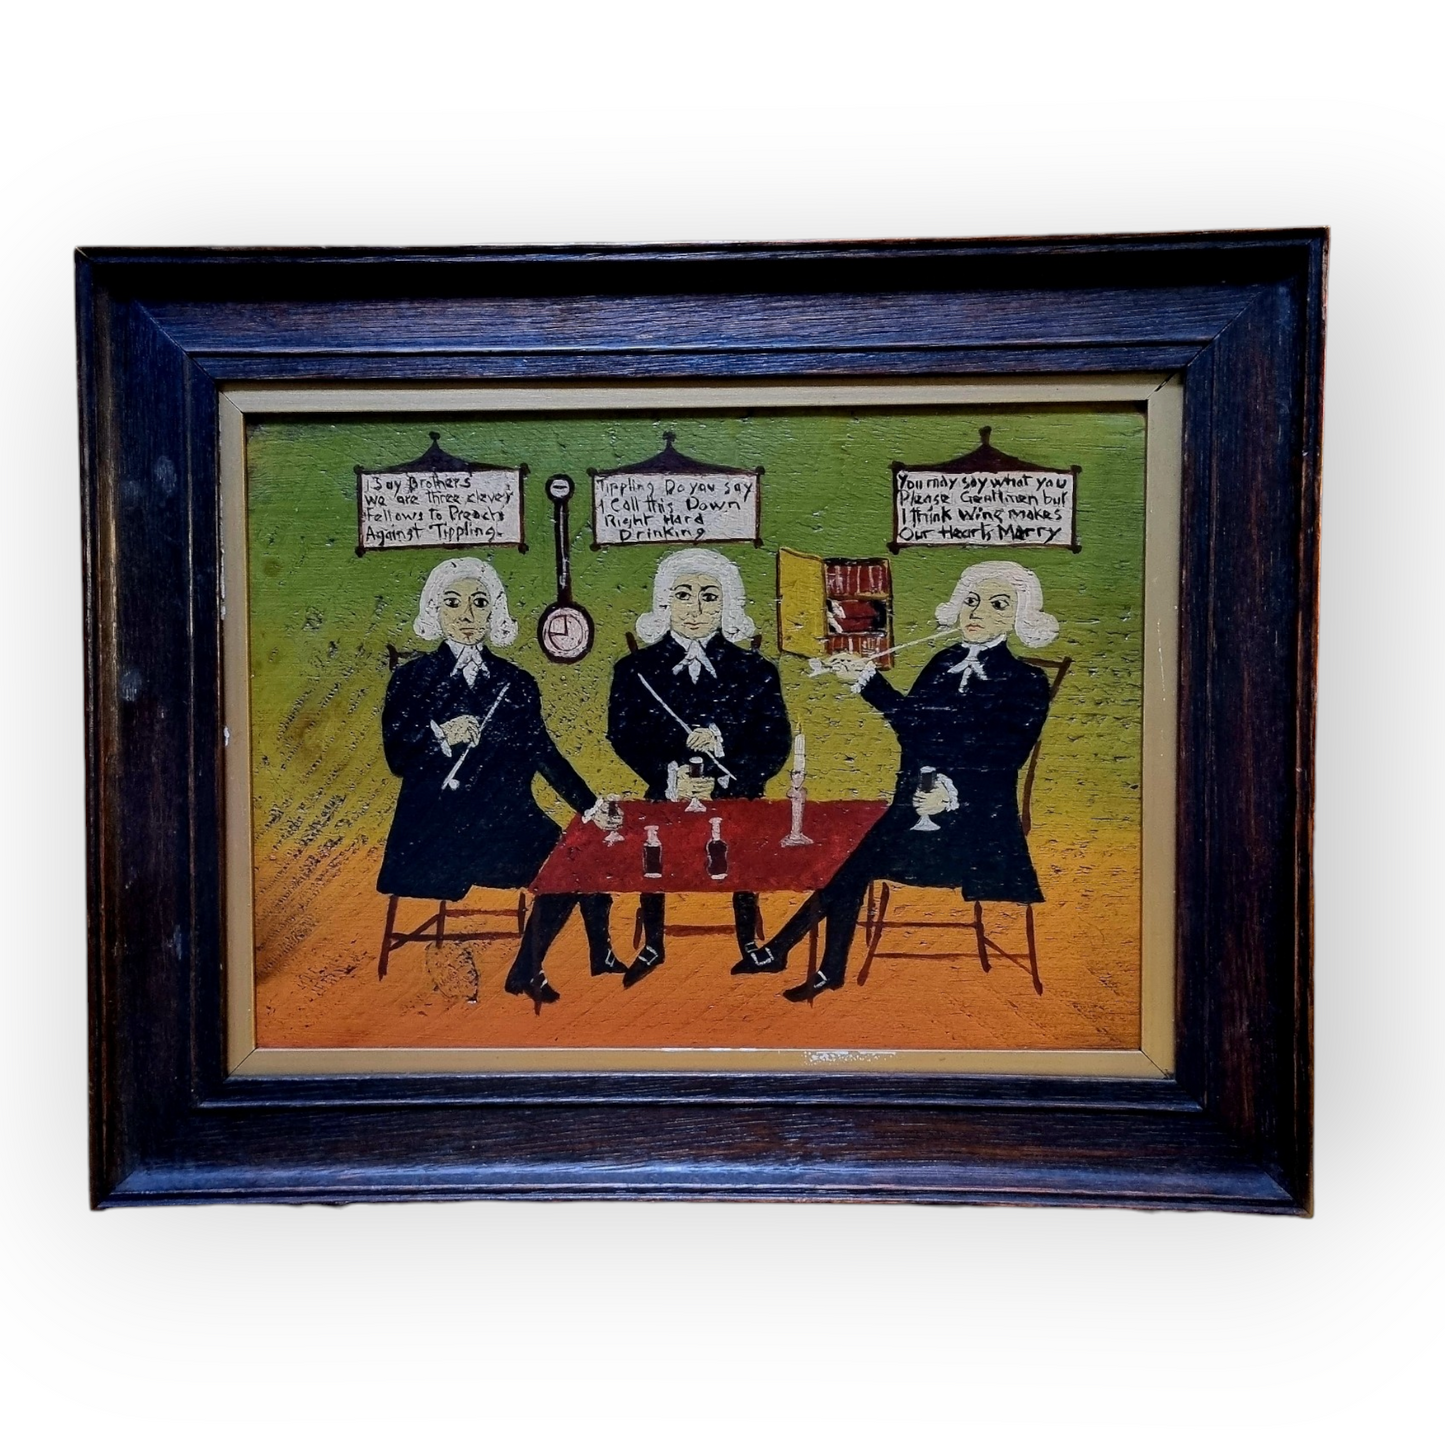 After The Original On Display at Compton Verney, A Naive 19th Century English School Antique Oil on Board Folk Art Painting Entitled "Three Sober Preachers"